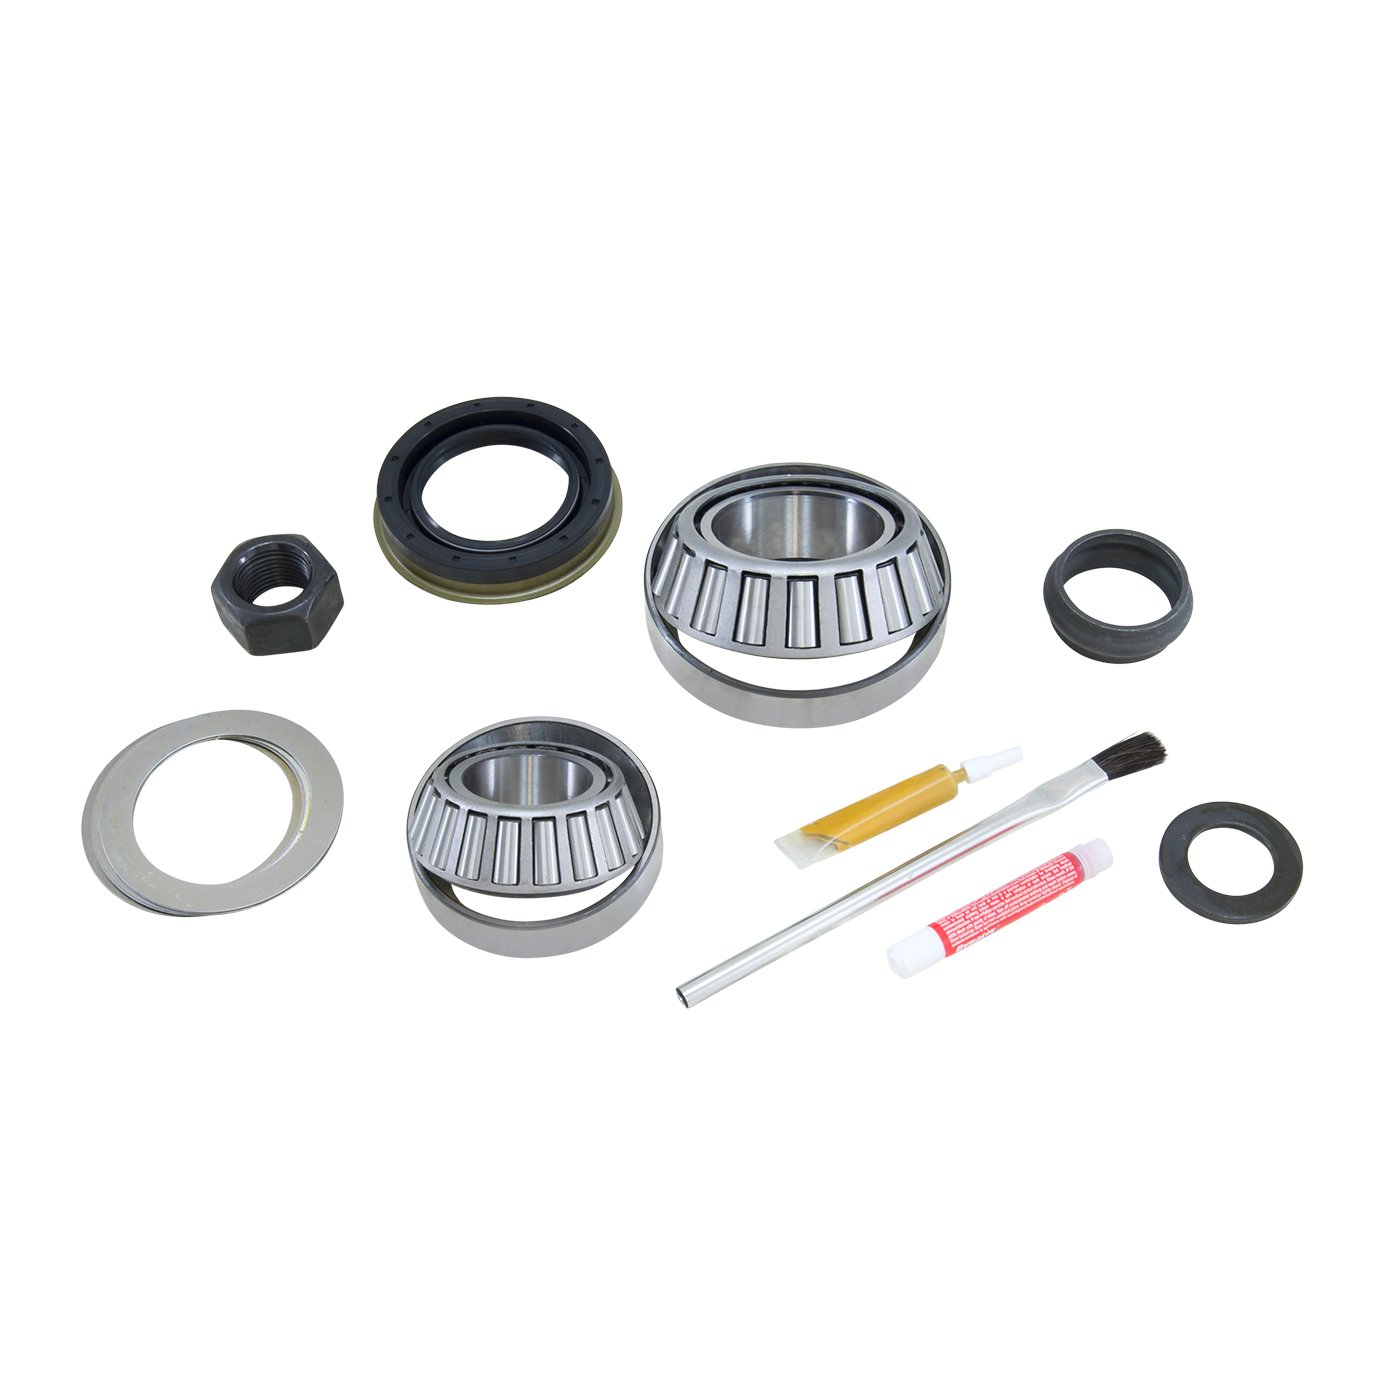 Pinion Install Kit For Dana 44-Hd Differential